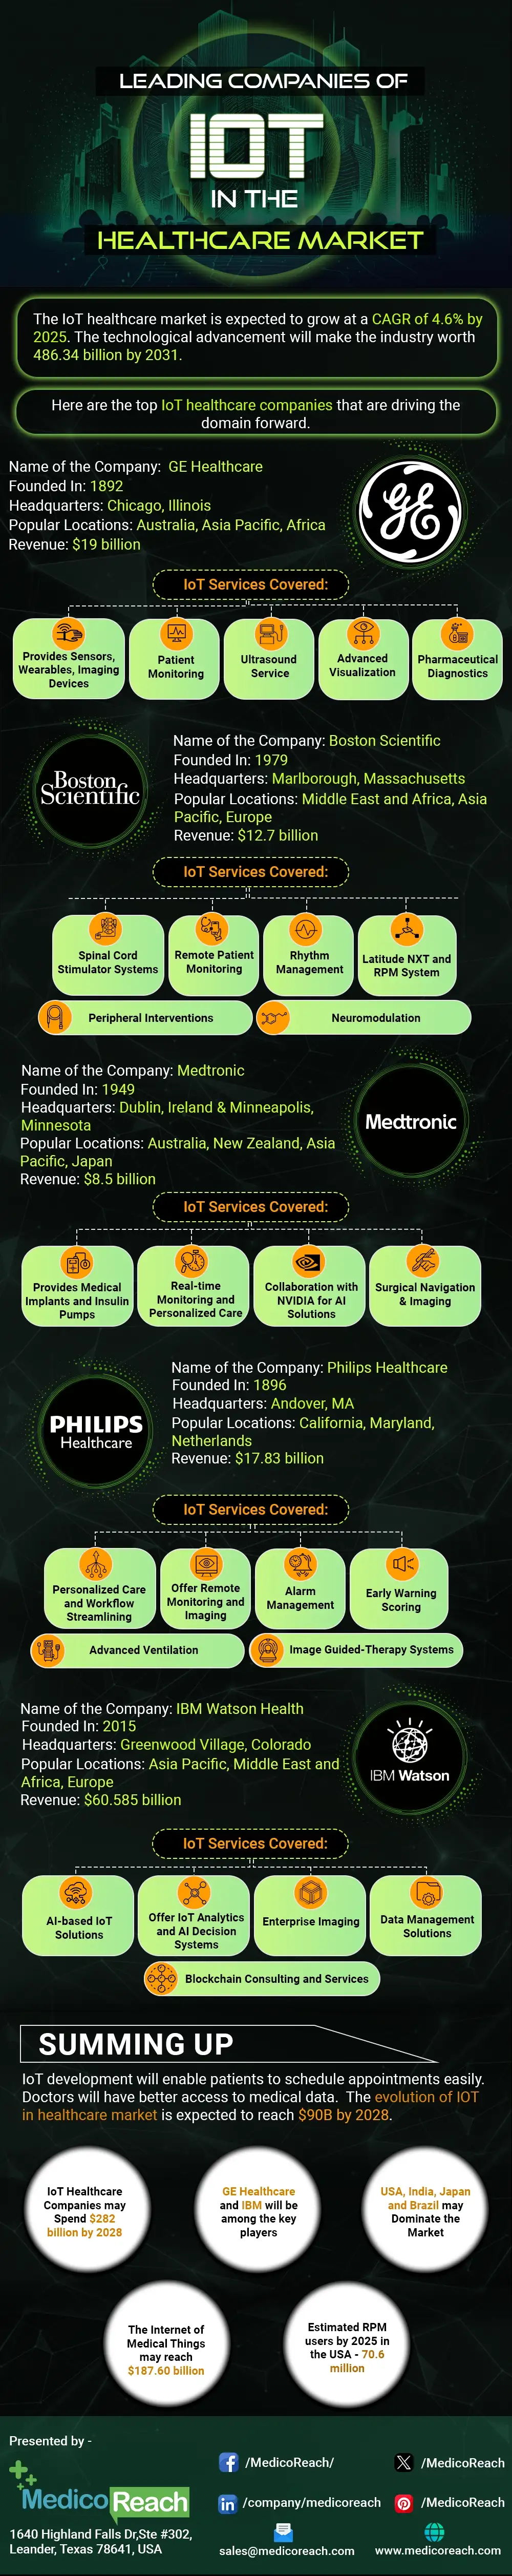 leading-companies-of-iot-in-the-healthcare-market